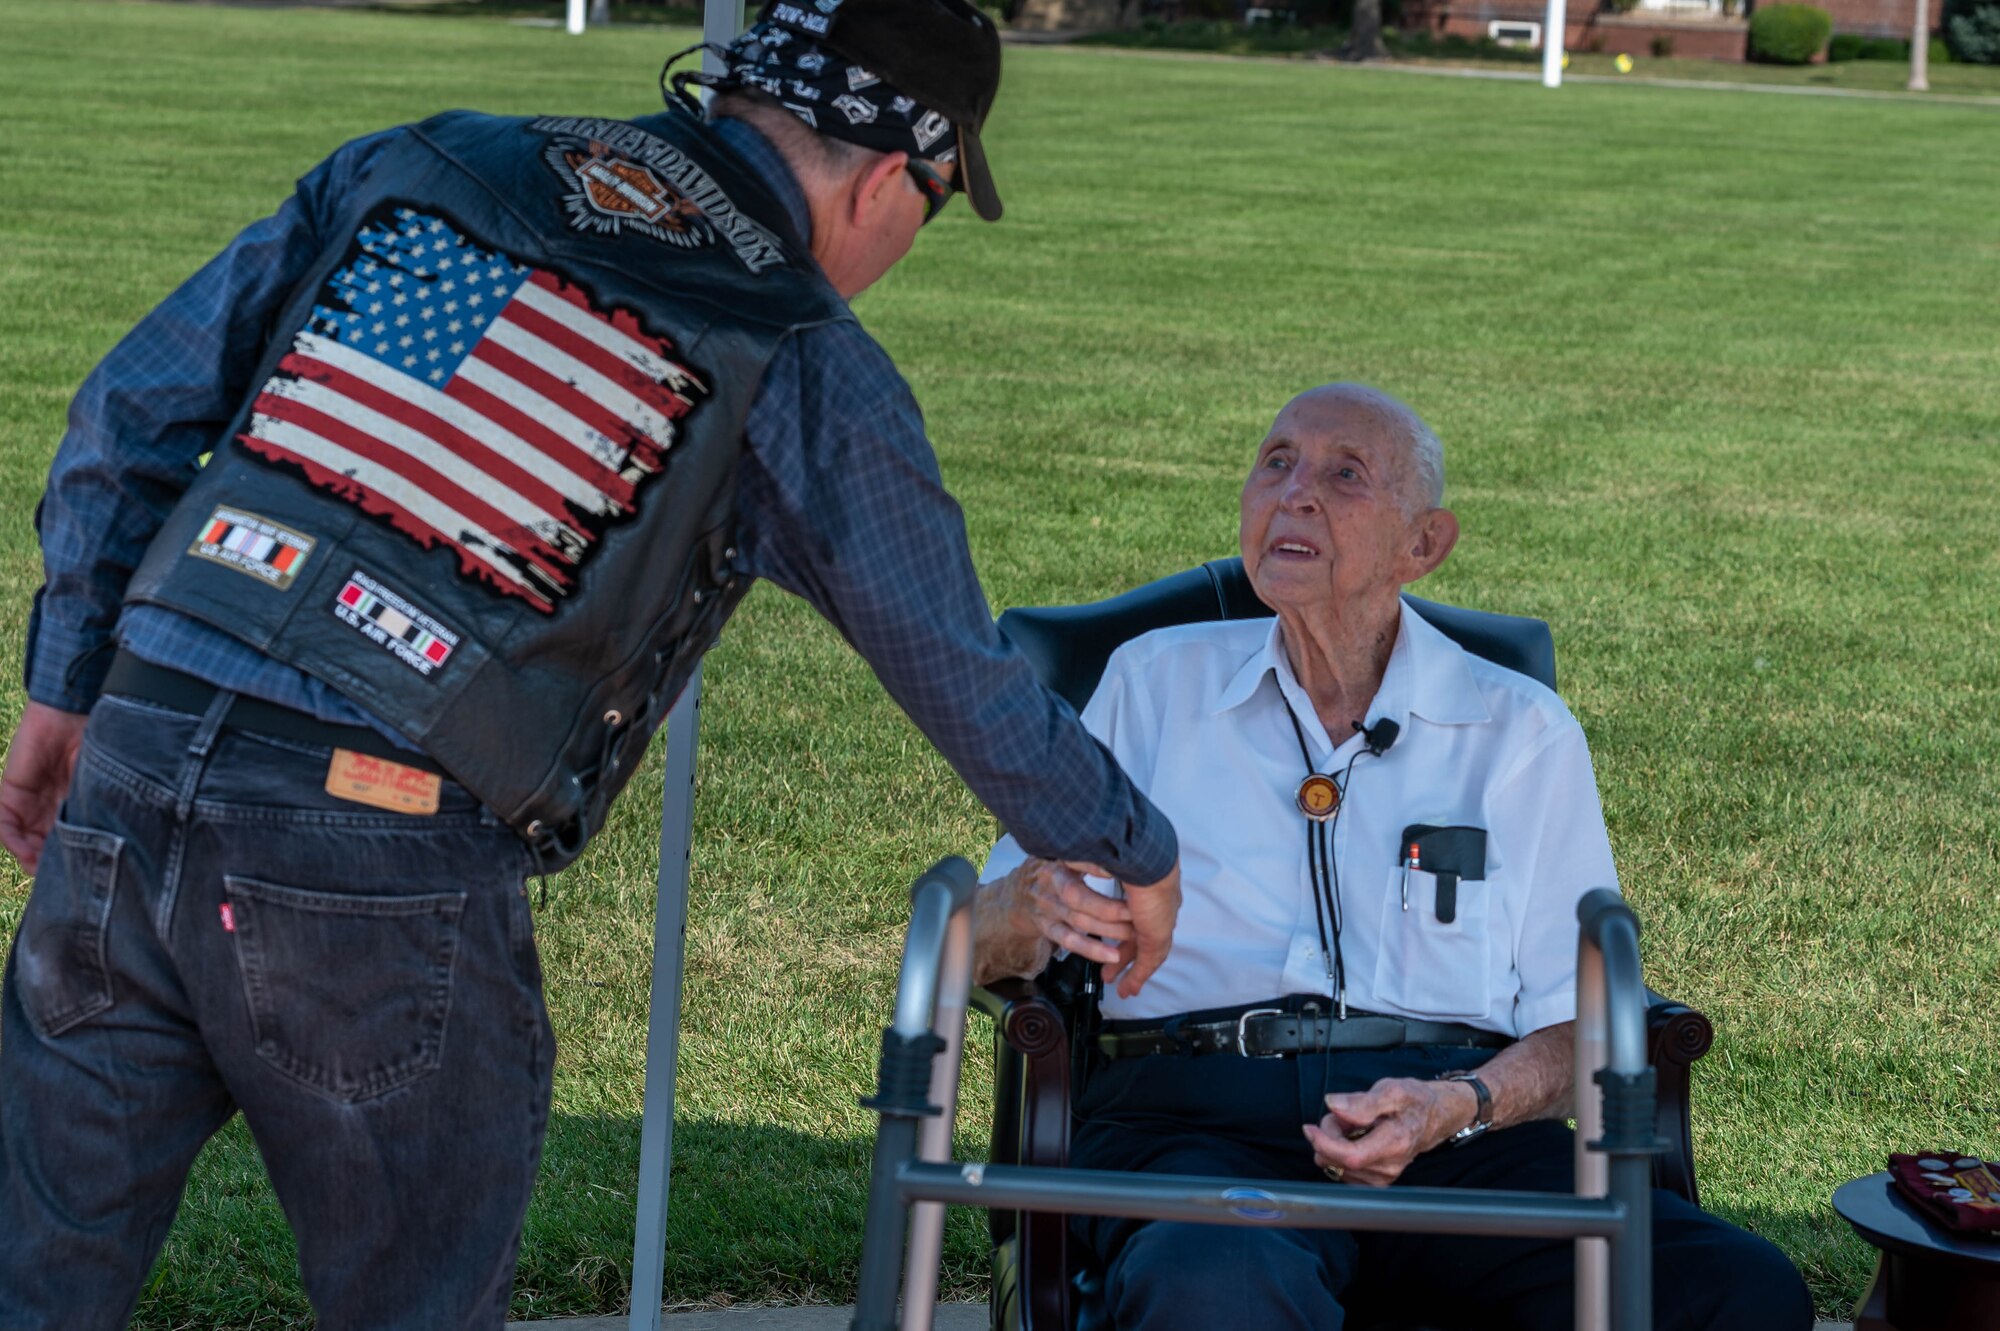  98-year-old former Prisoner of War joins Scott for POW/MIA Day recognition 